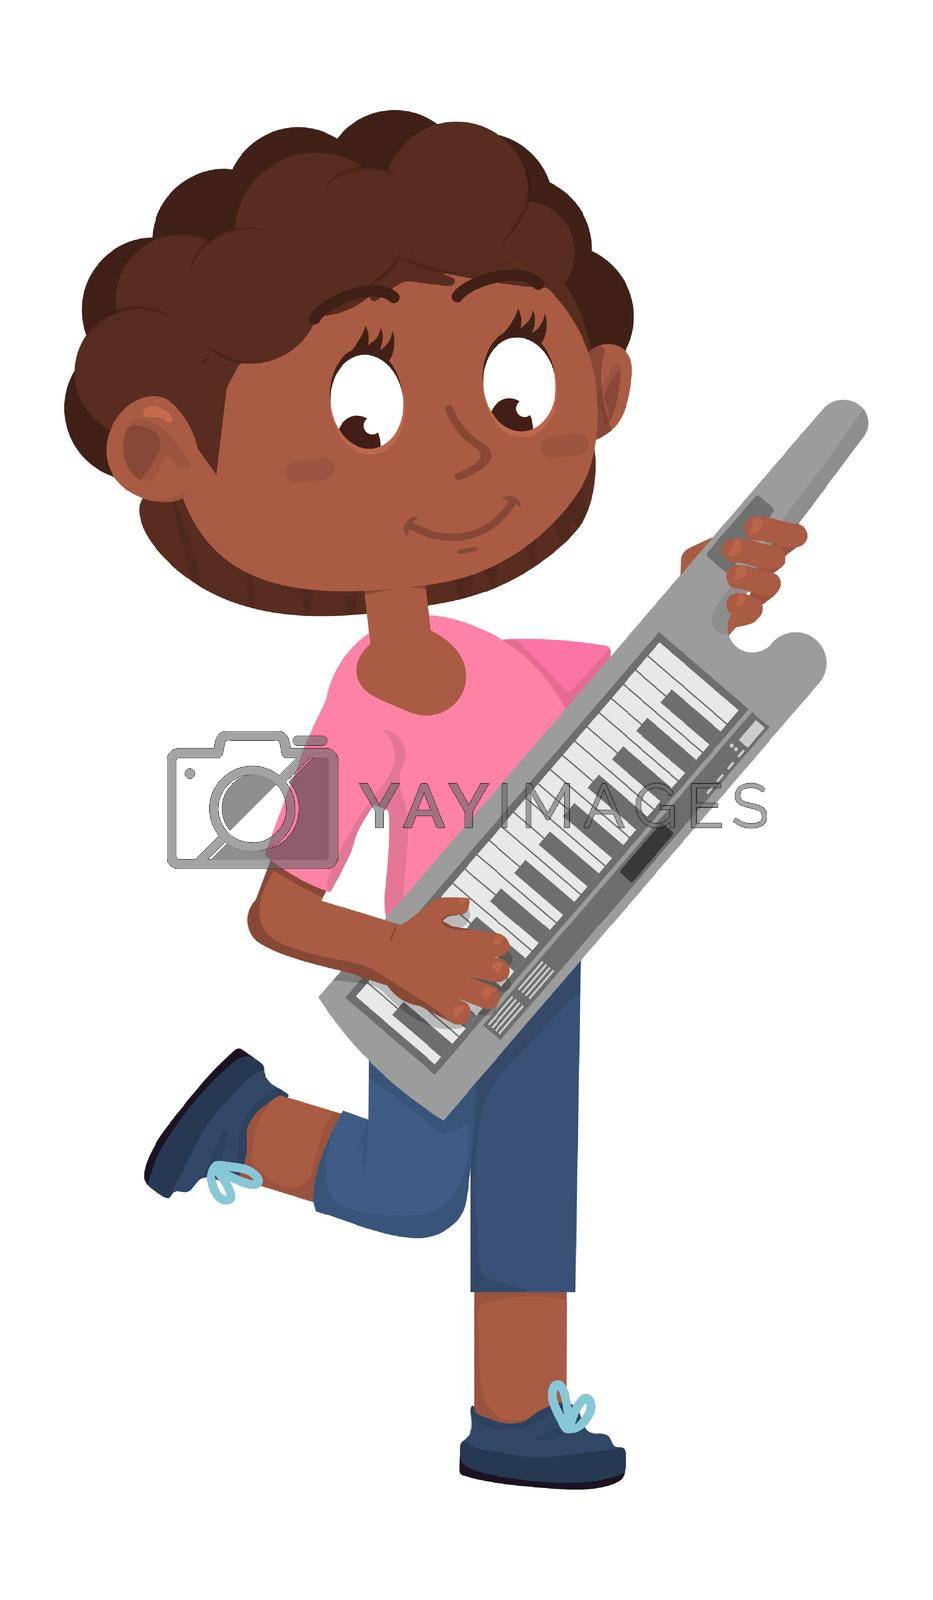 Royalty free image of Band player with keytar. Young boy playing music by LadadikArt